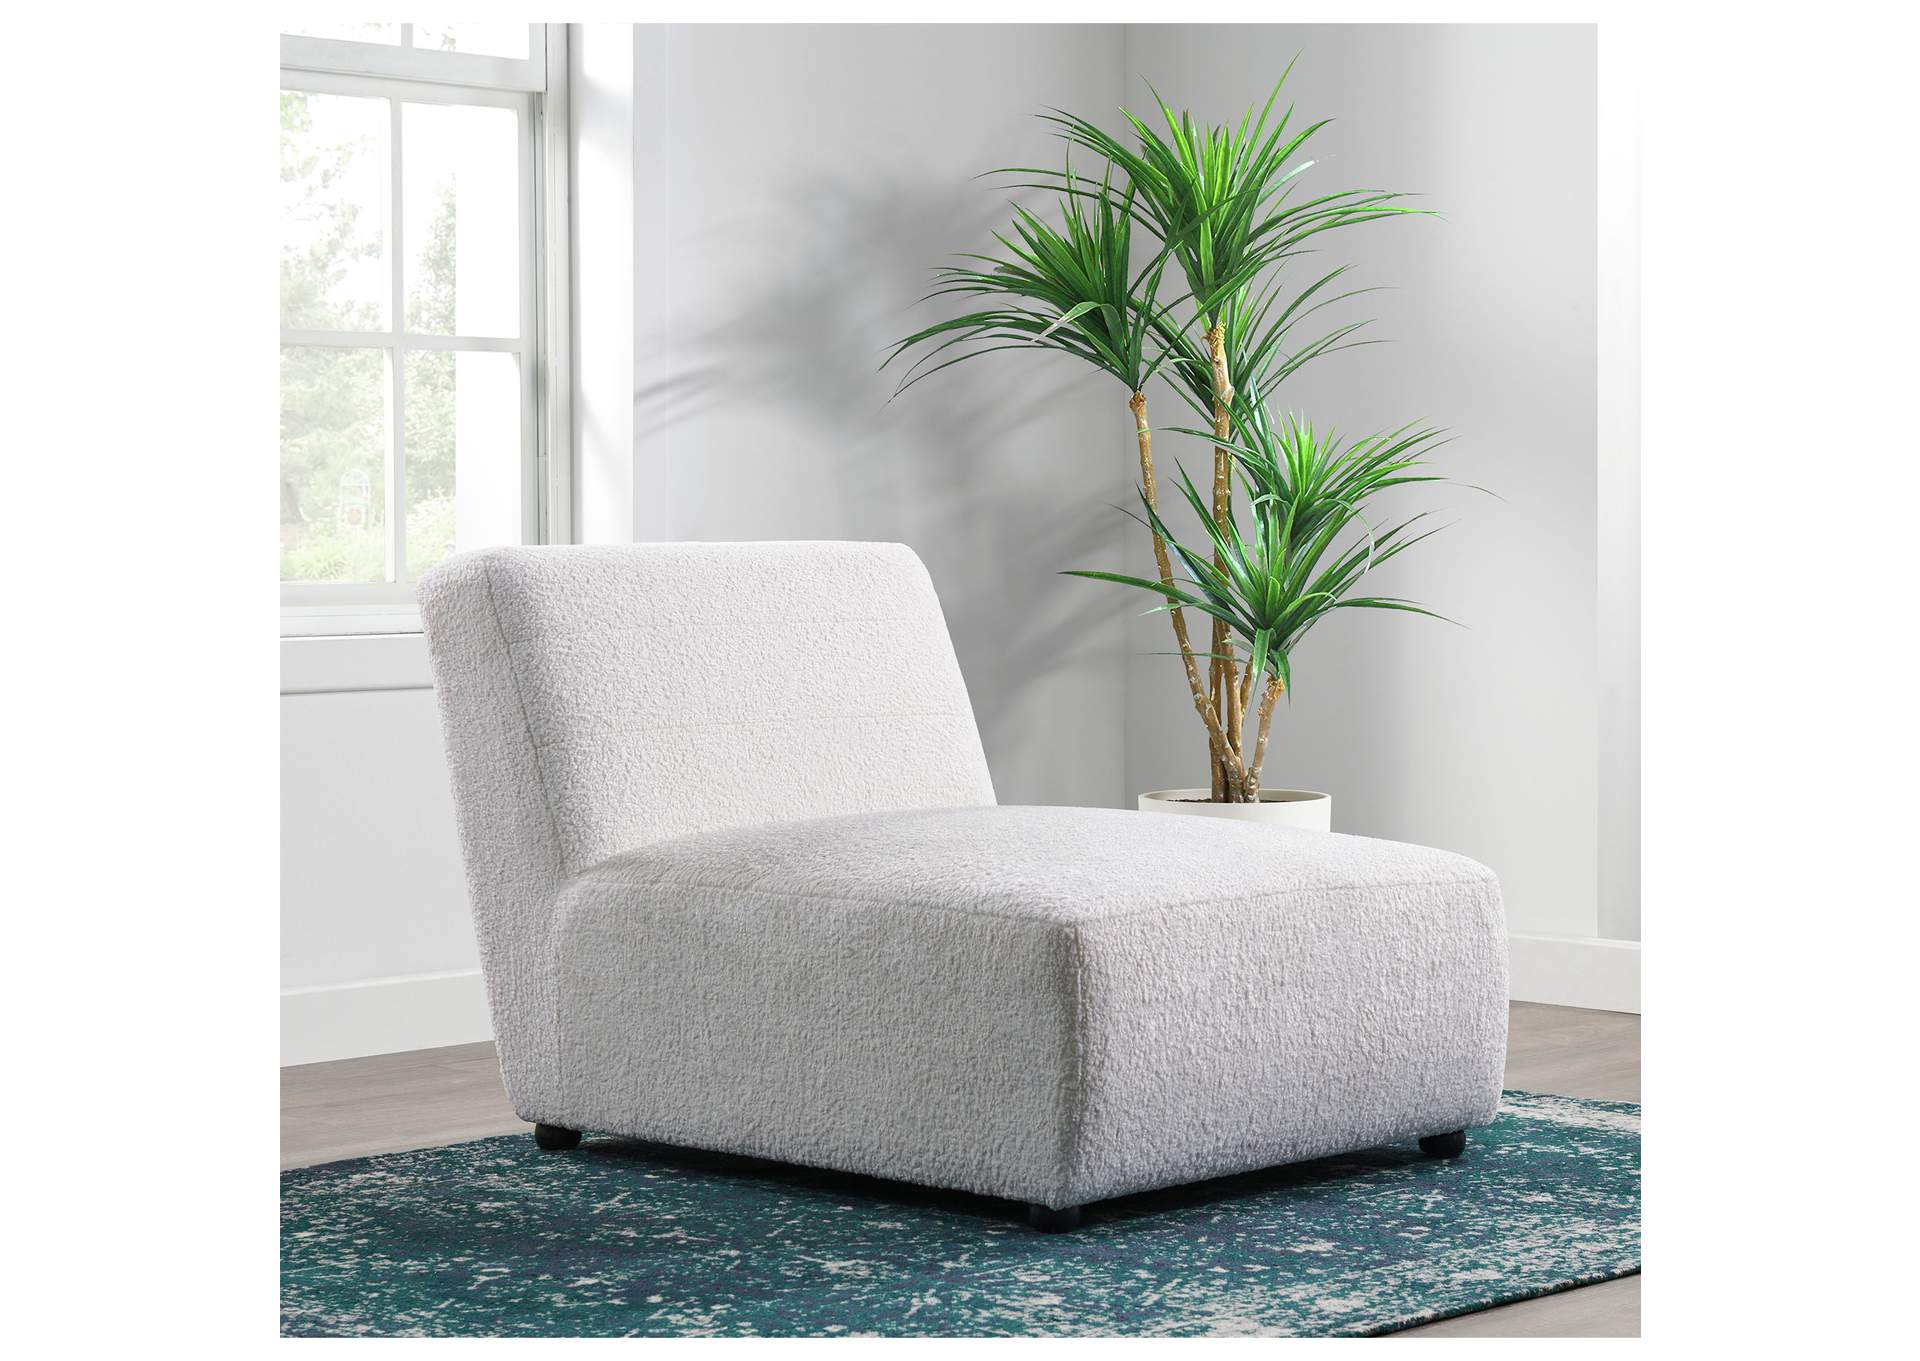 Exeter Lounger Sheep Skin White 3A,Elements